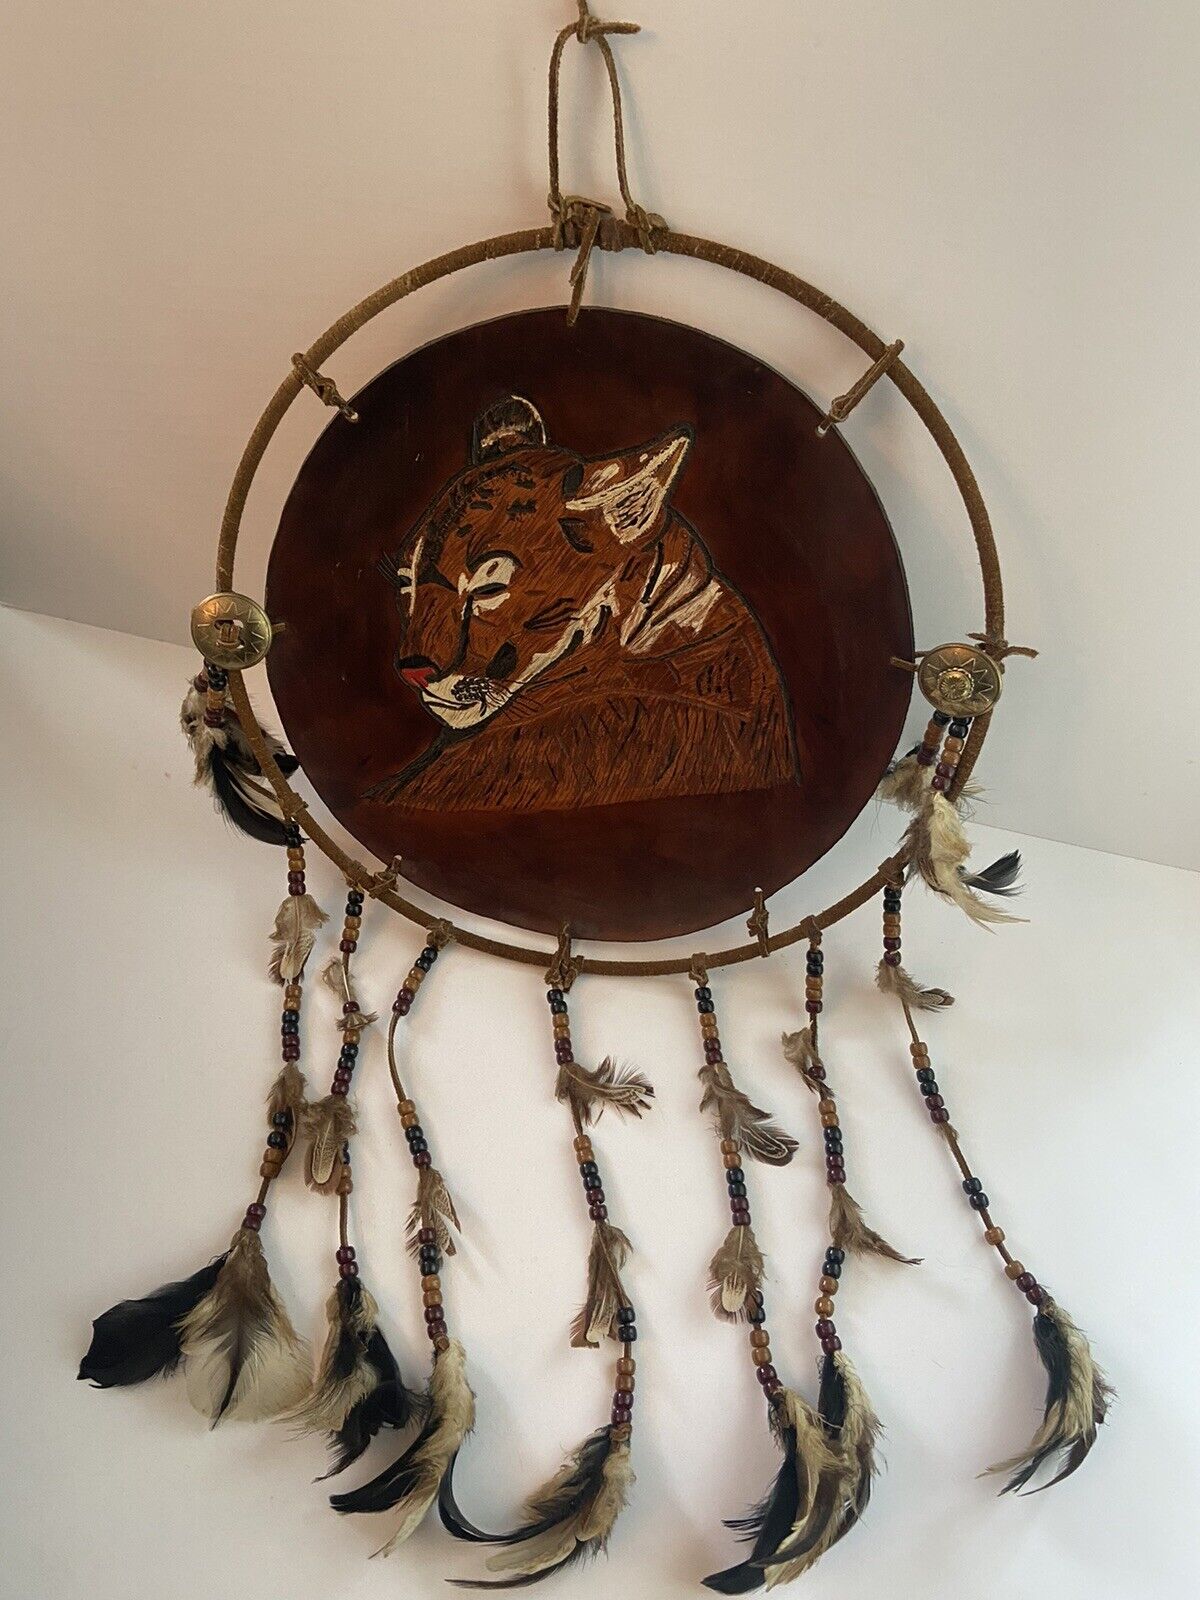 Vintage Dream Catcher Cougar Pyrography Leather 14” W/Beads & Feathers Handmade